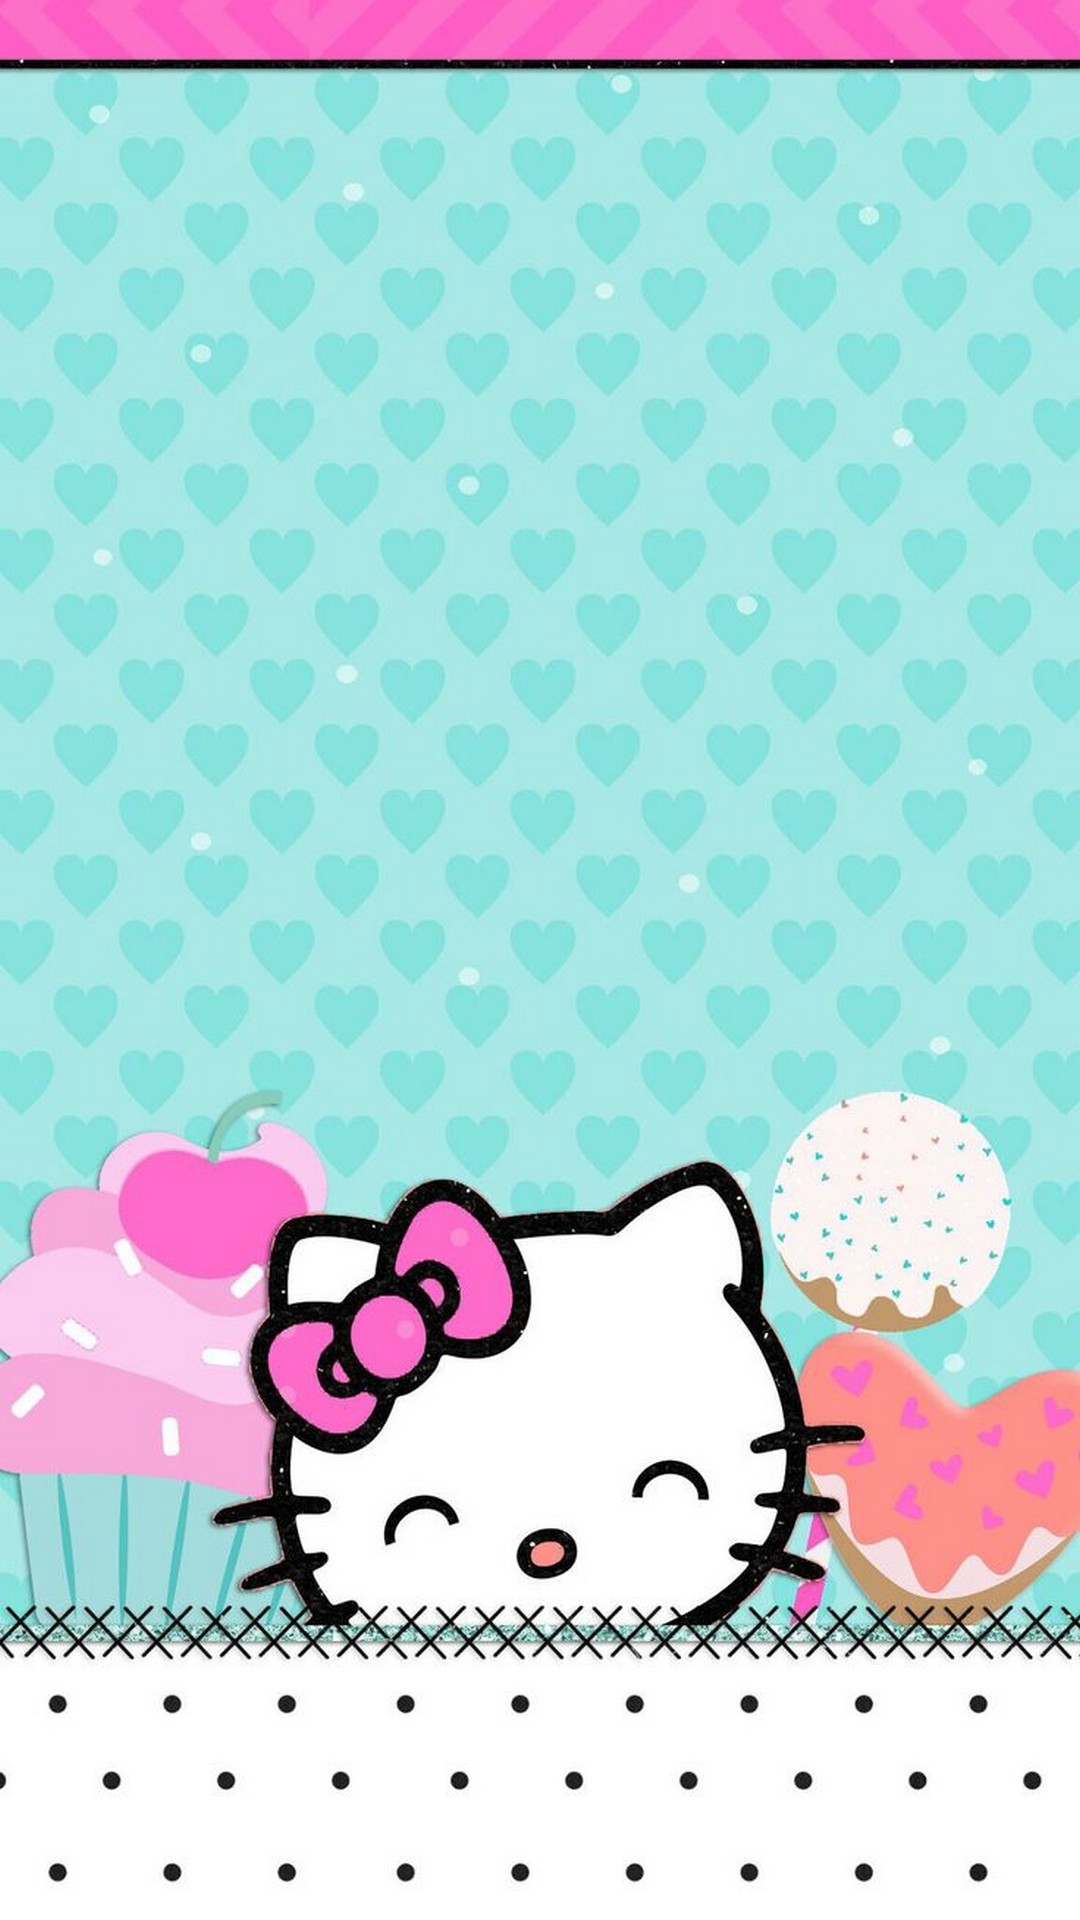 iPhone X Wallpaper Hello Kitty with image resolution 1080x1920 pixel. You can make this wallpaper for your iPhone 5, 6, 7, 8, X backgrounds, Mobile Screensaver, or iPad Lock Screen